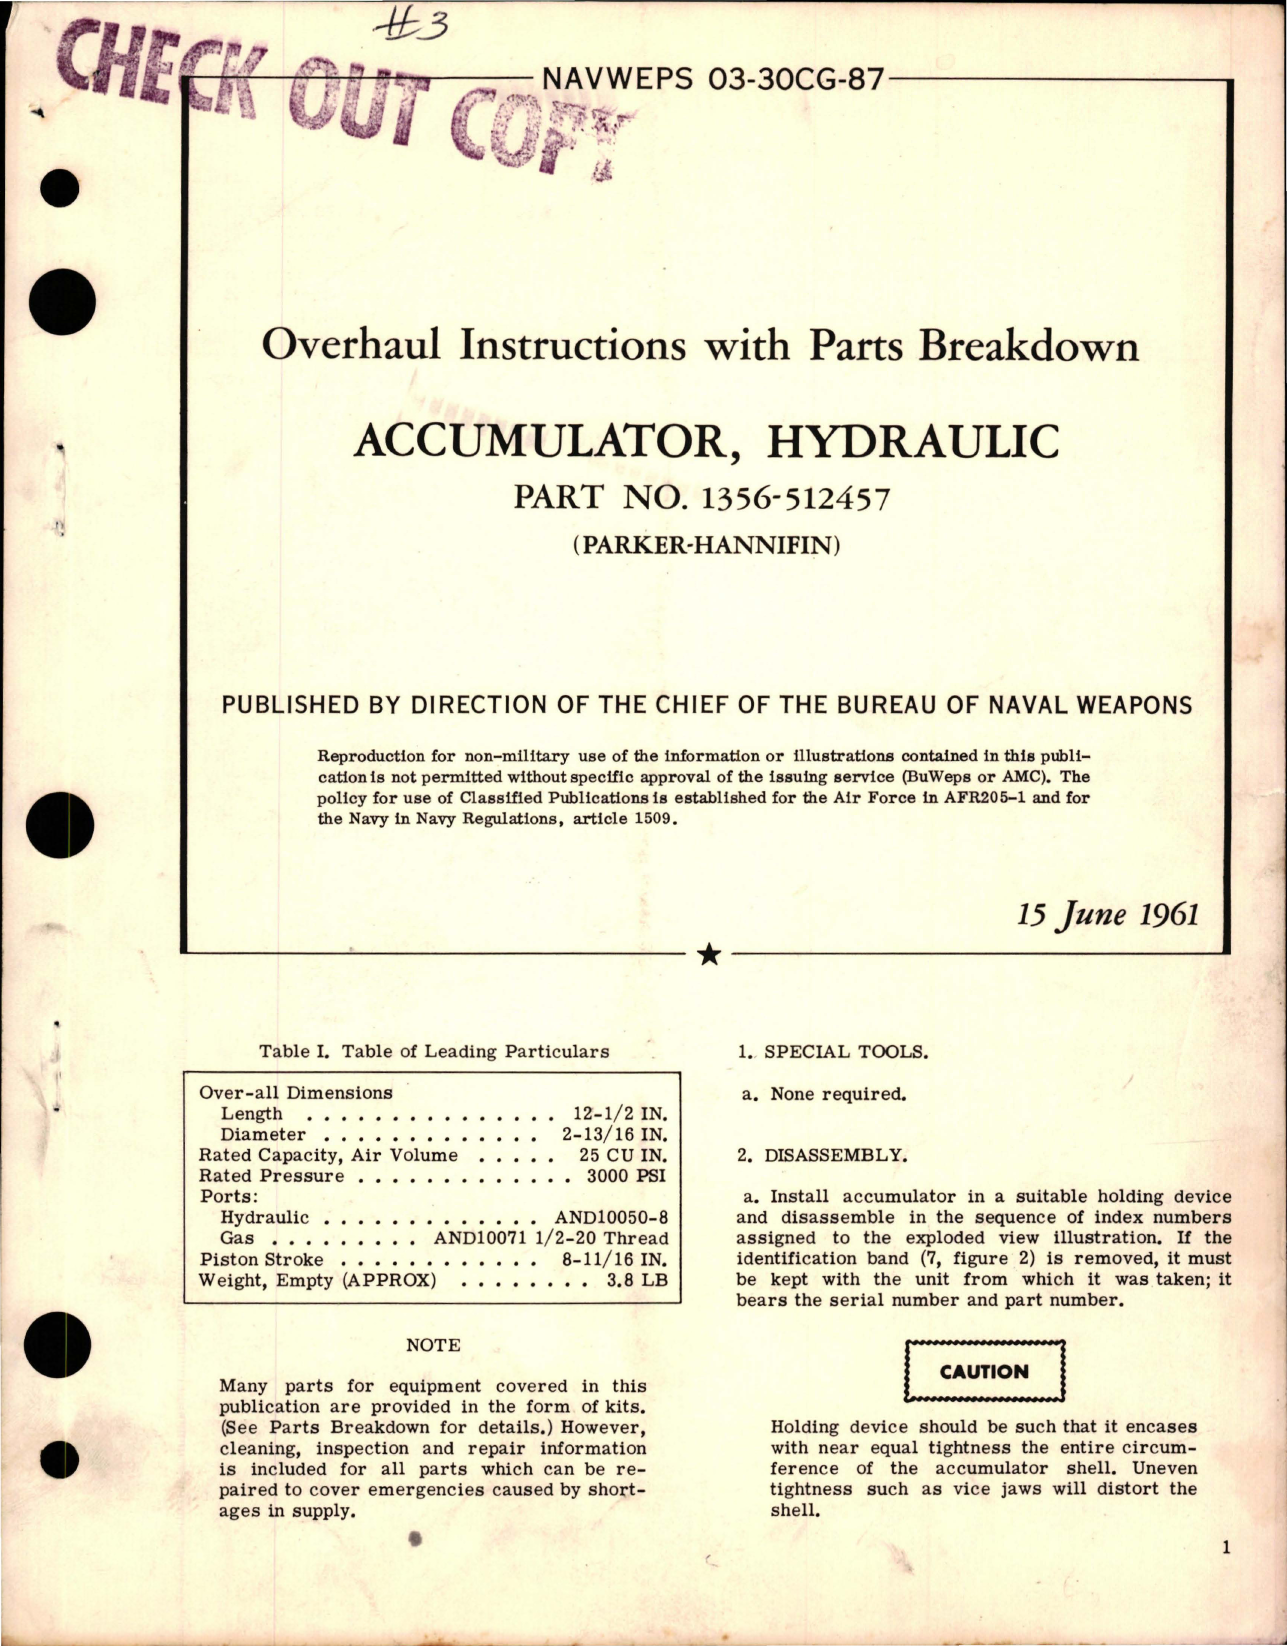 Sample page 1 from AirCorps Library document: Overhaul Instructions with Parts Breakdown for Hydraulic Accumulator - Part 1356-512457